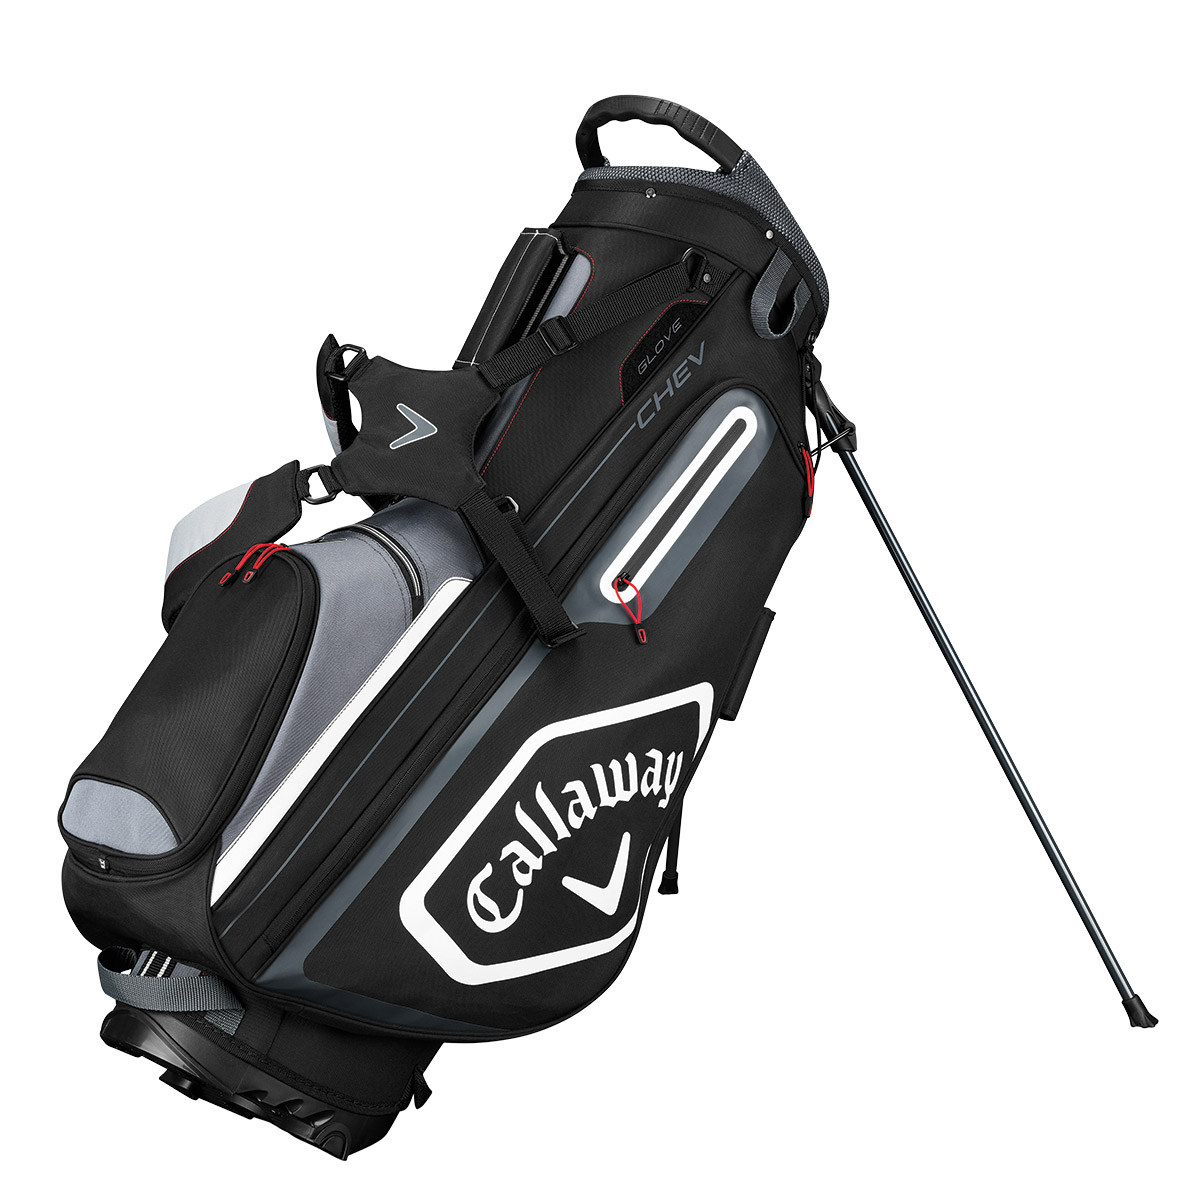 Callaway Stand Bags | The Art of Mike Mignola